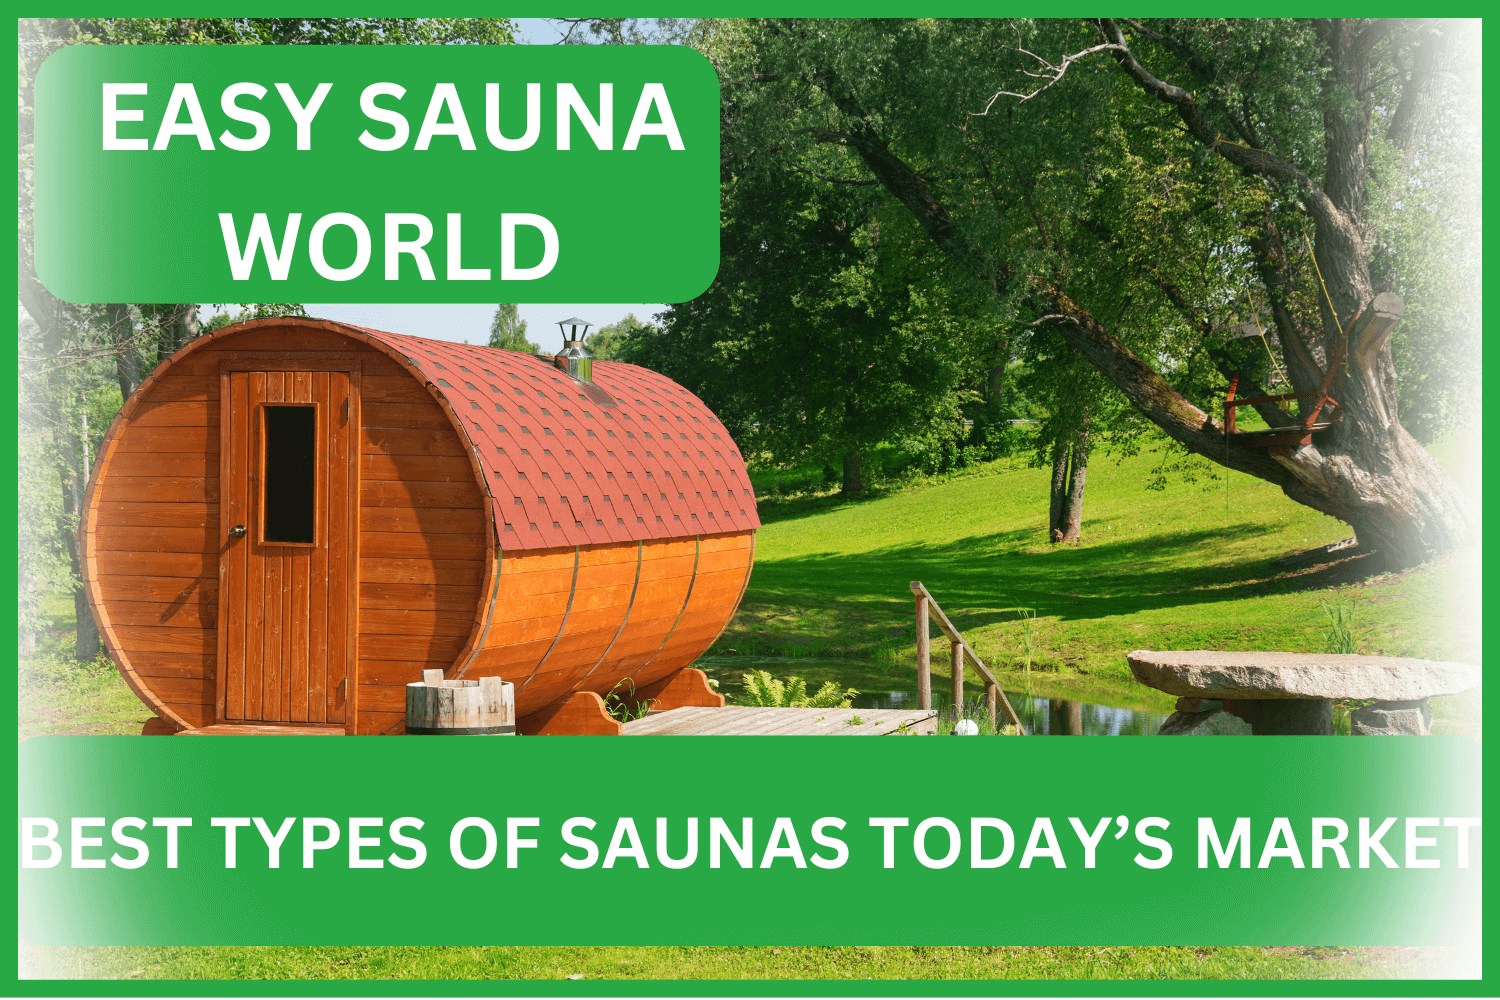 Best Saunas To Buy For Your Personal use at Home - Full List